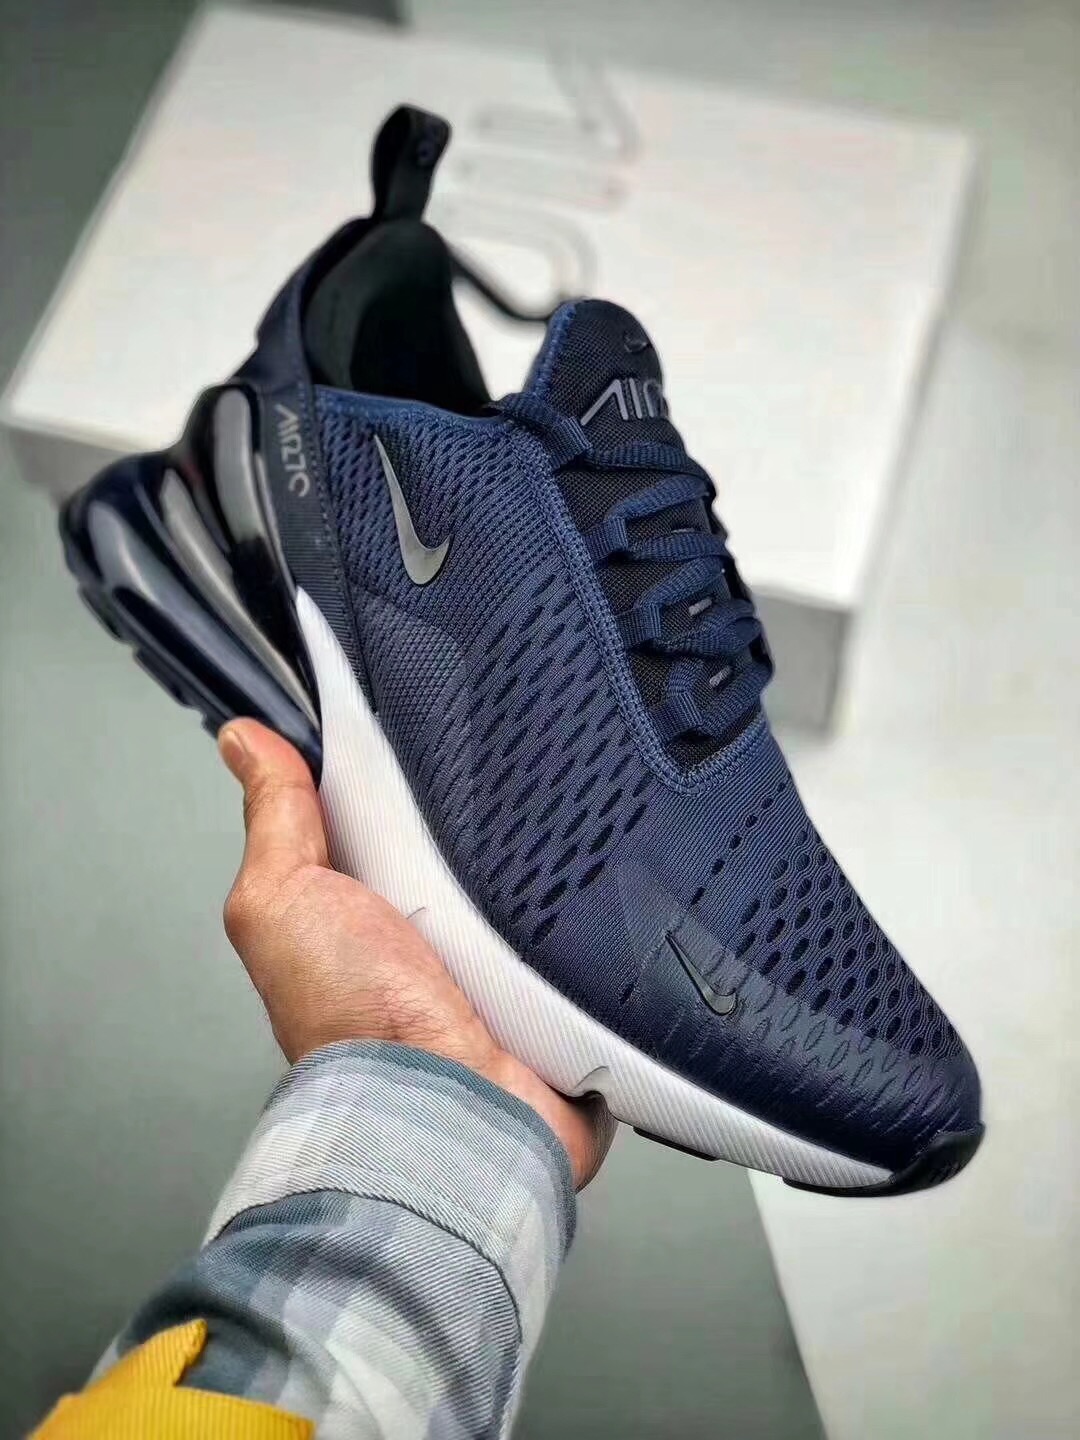 Nike Air Max 270 Midnight Navy/Black-White For Sale – Sneaker Hello